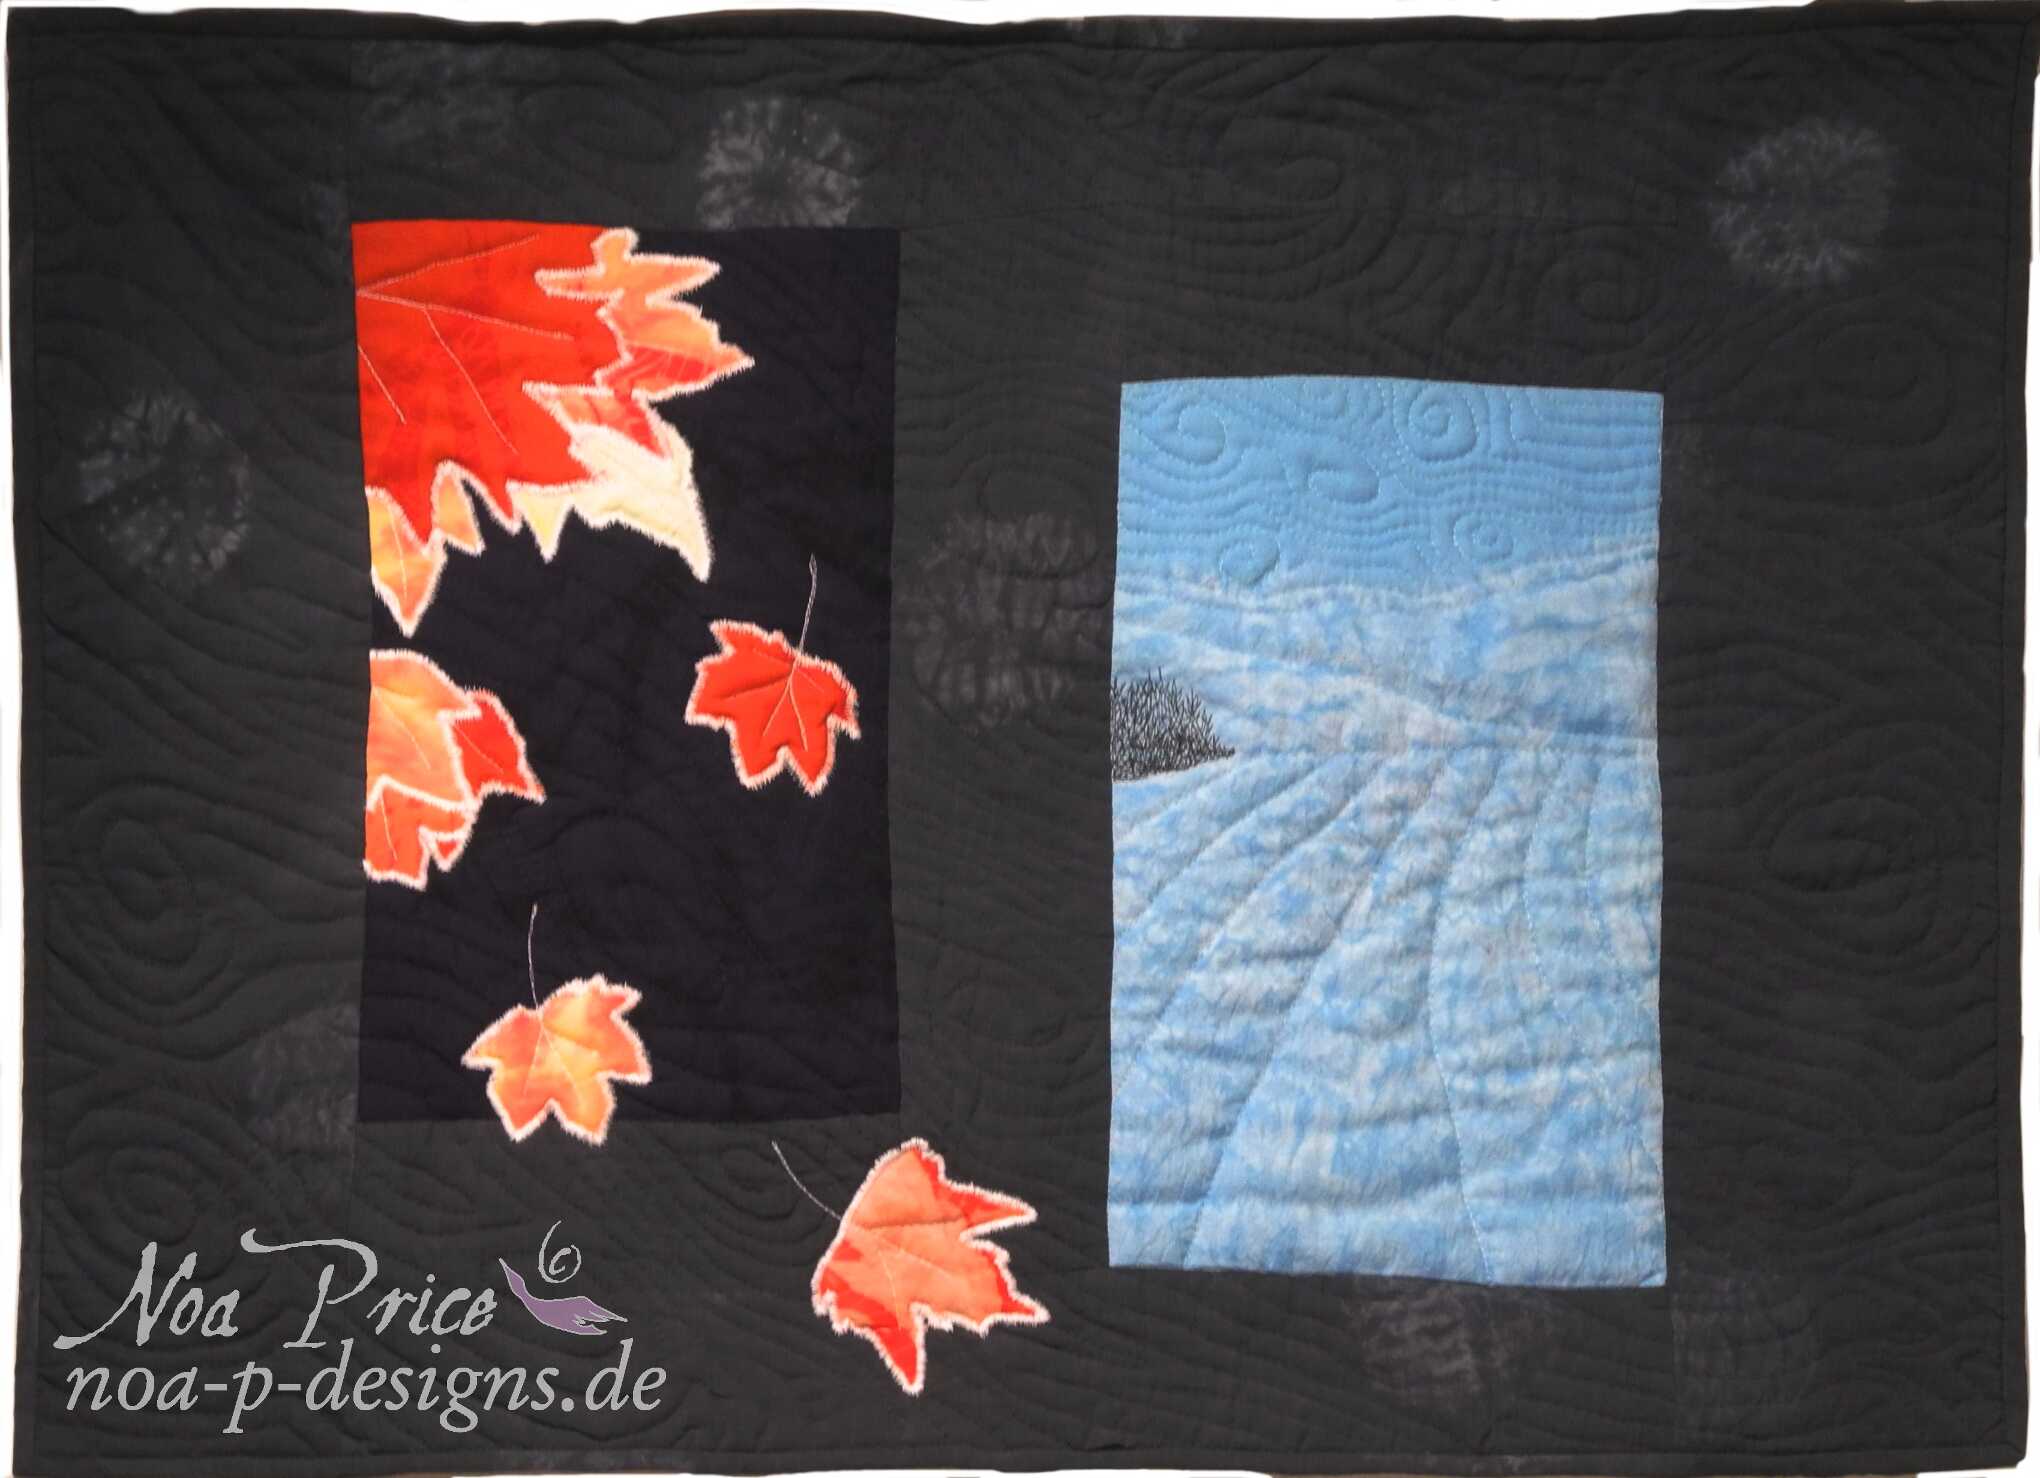 Shiboried quilt image of fall leaves and snowed fields